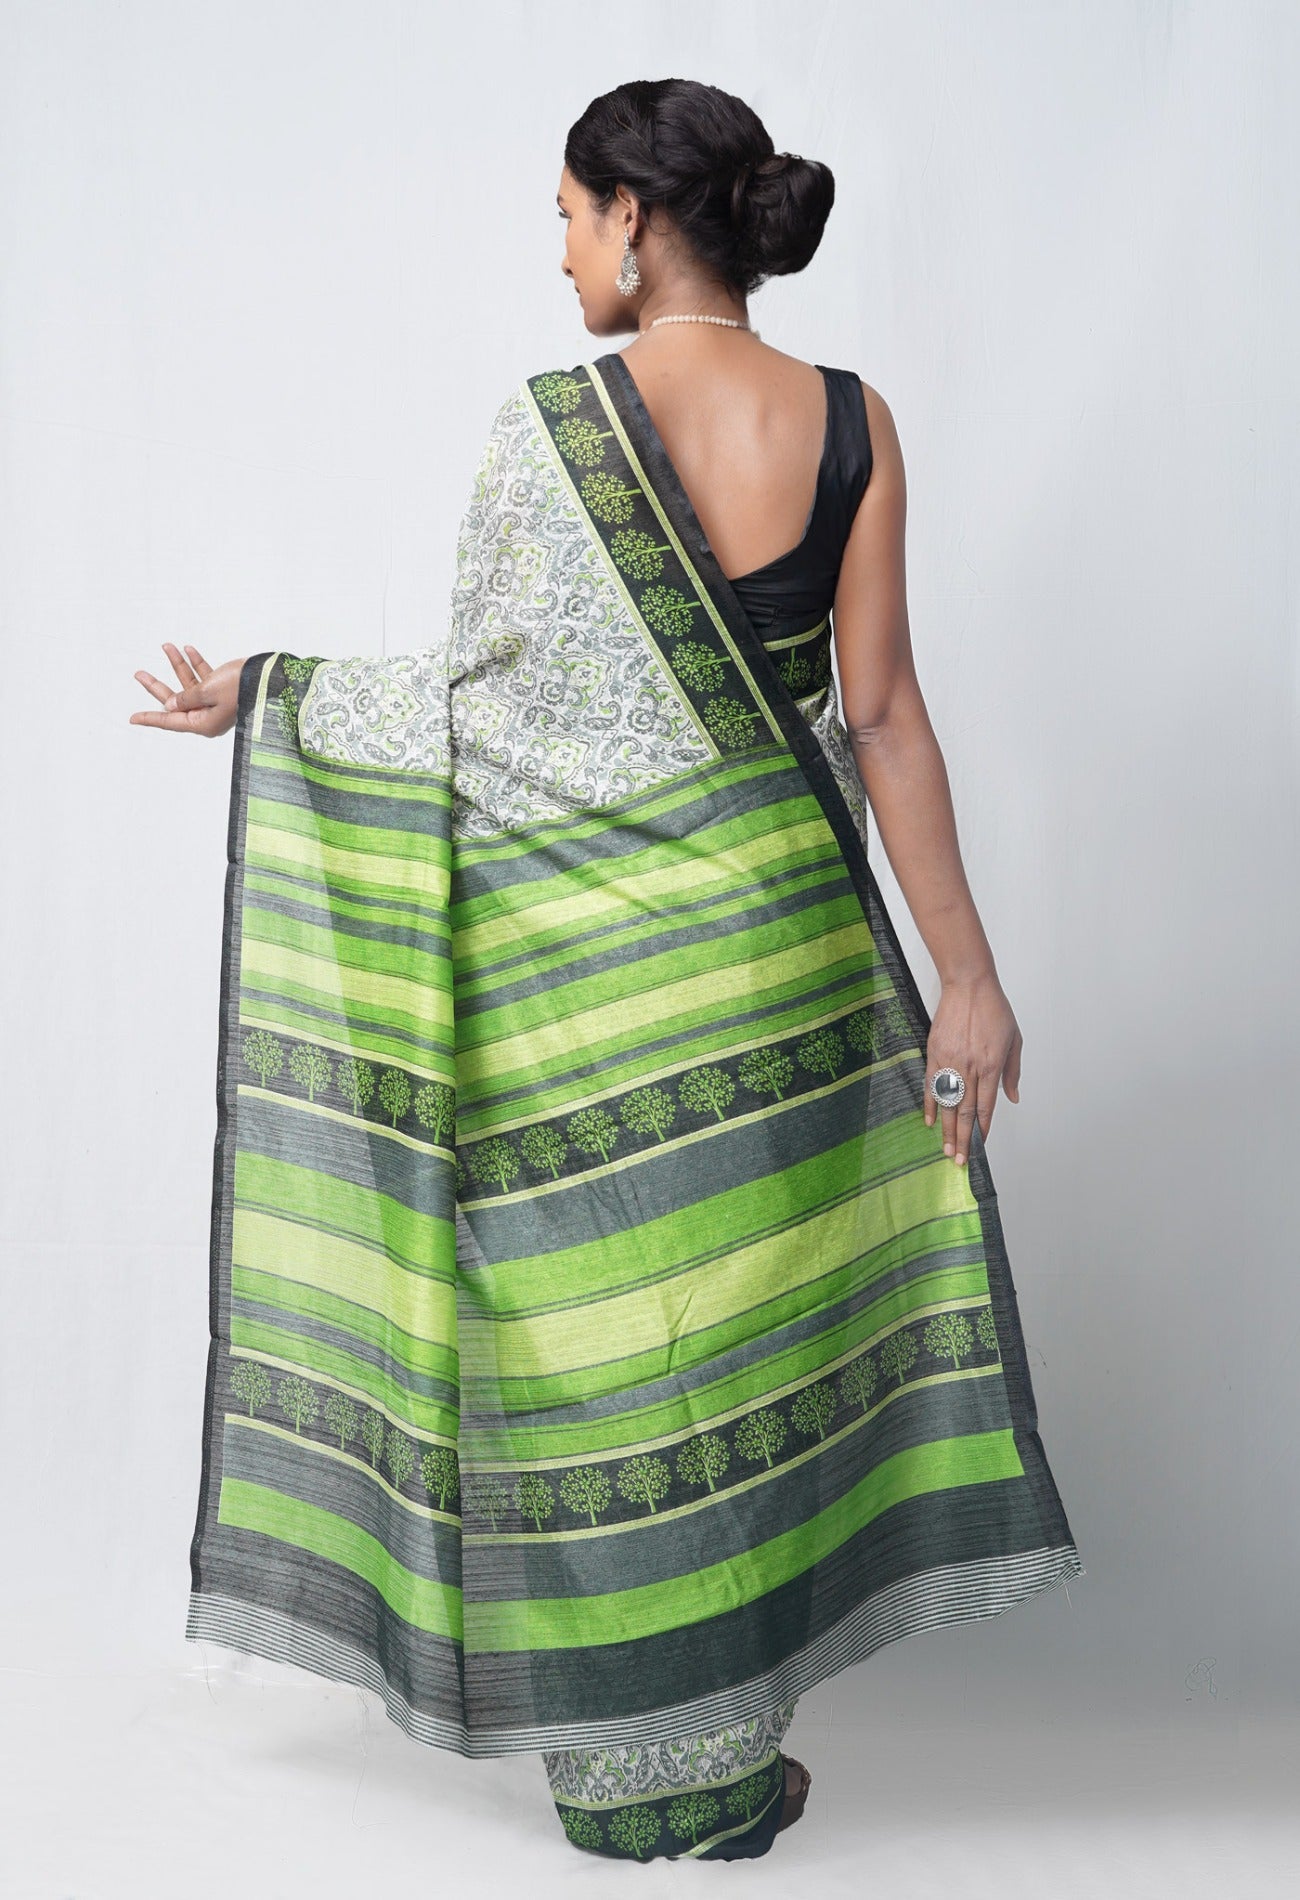 Online Shopping for Green  Skin Printed Jute  Sico Saree with Fancy/Ethnic Prints from Chhattisgarh at Unnatisilks.com India
